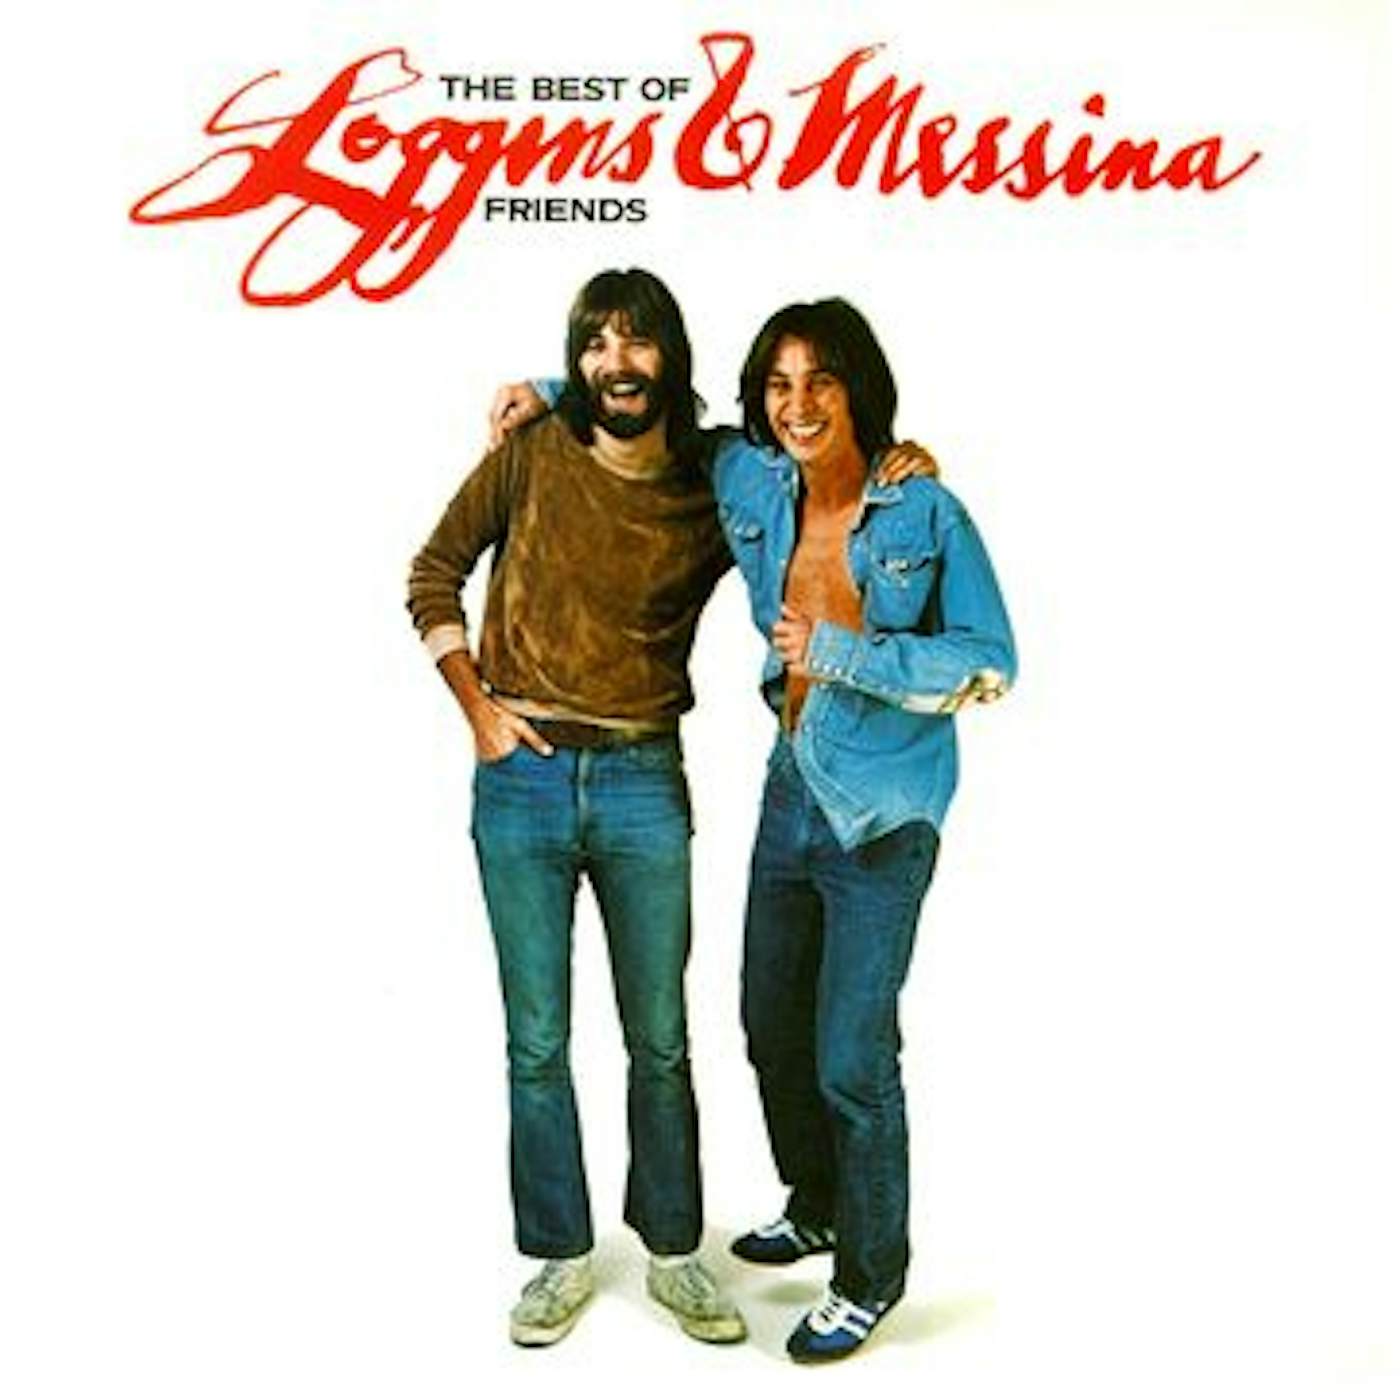 Loggins & Messina Best of Friends: Greatest Hits Vinyl Record